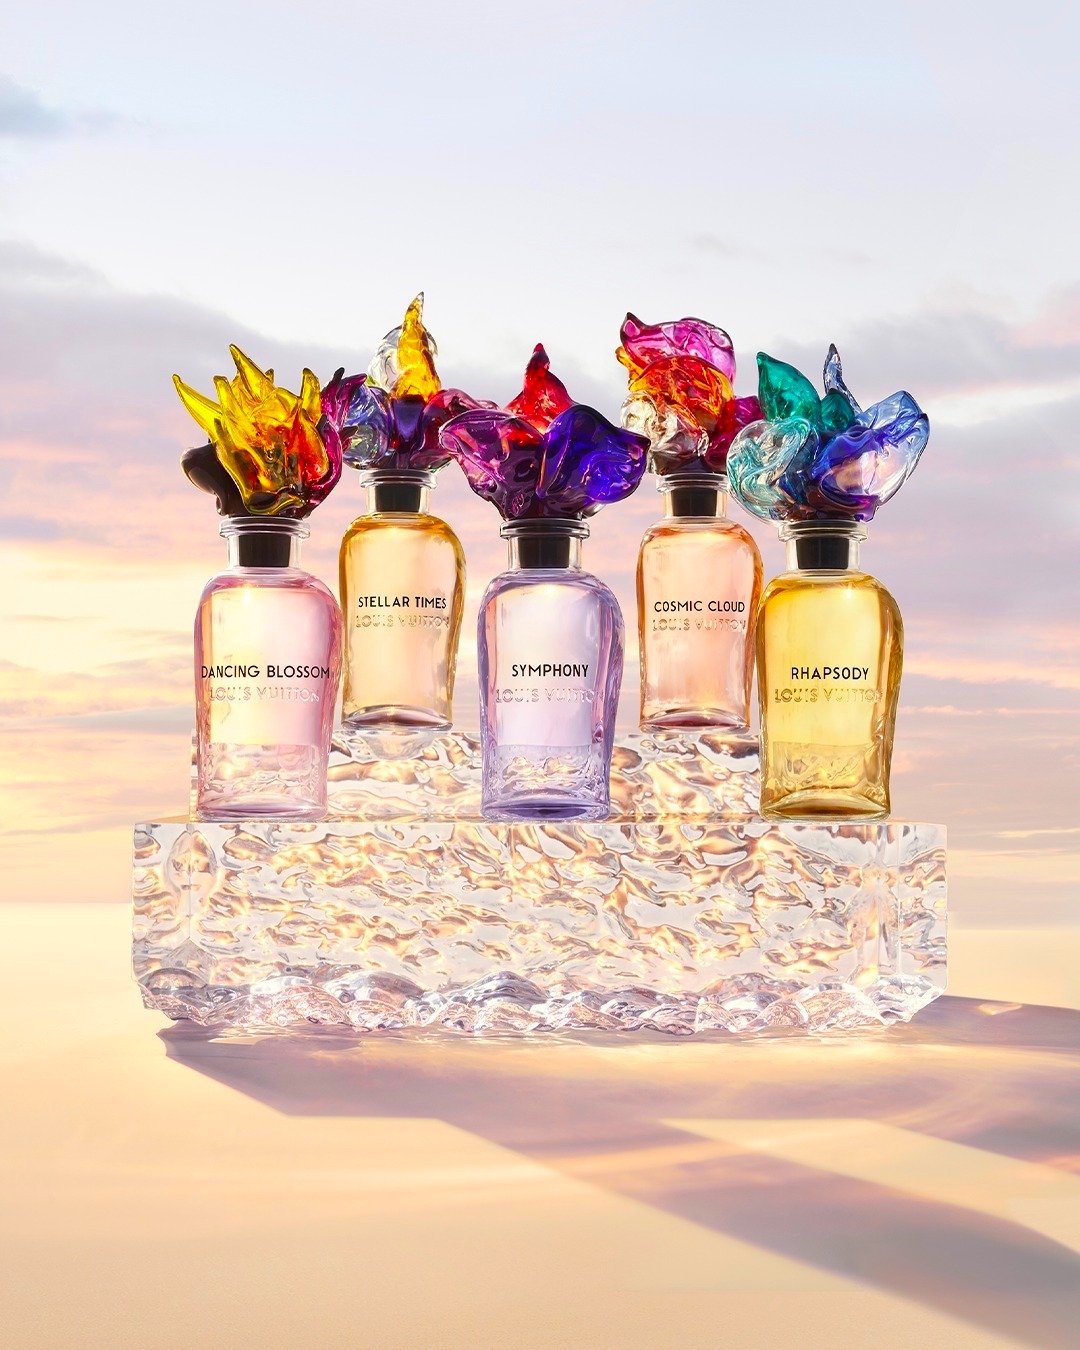 Louis Vuitton releases new Myriad fragrance - The Glass Magazine